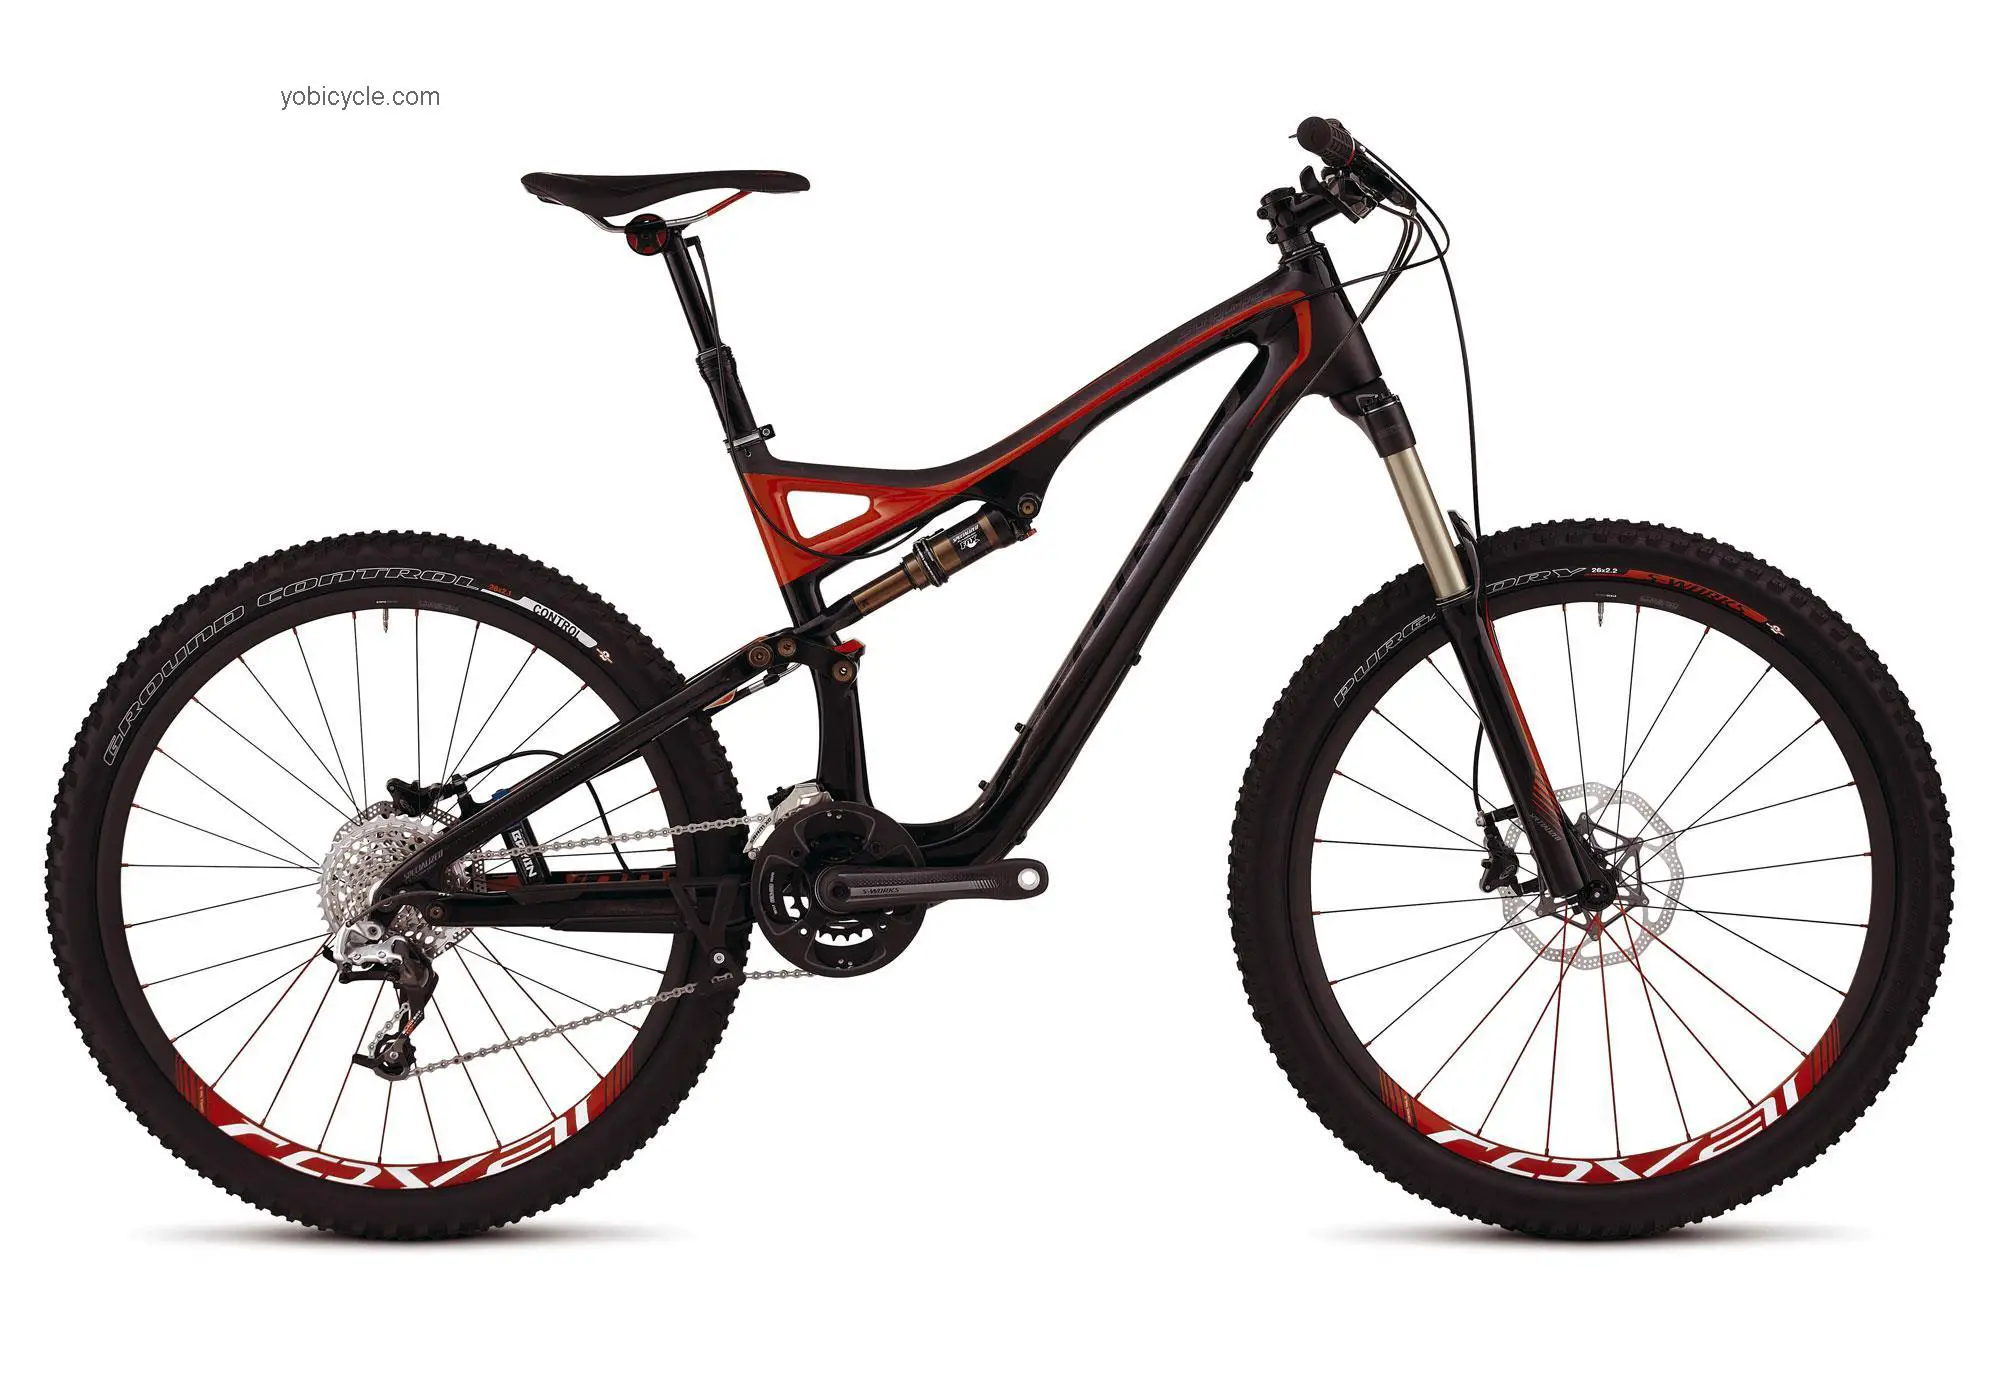 Specialized S-Works Stumpjumper FSR Carbon competitors and comparison tool online specs and performance